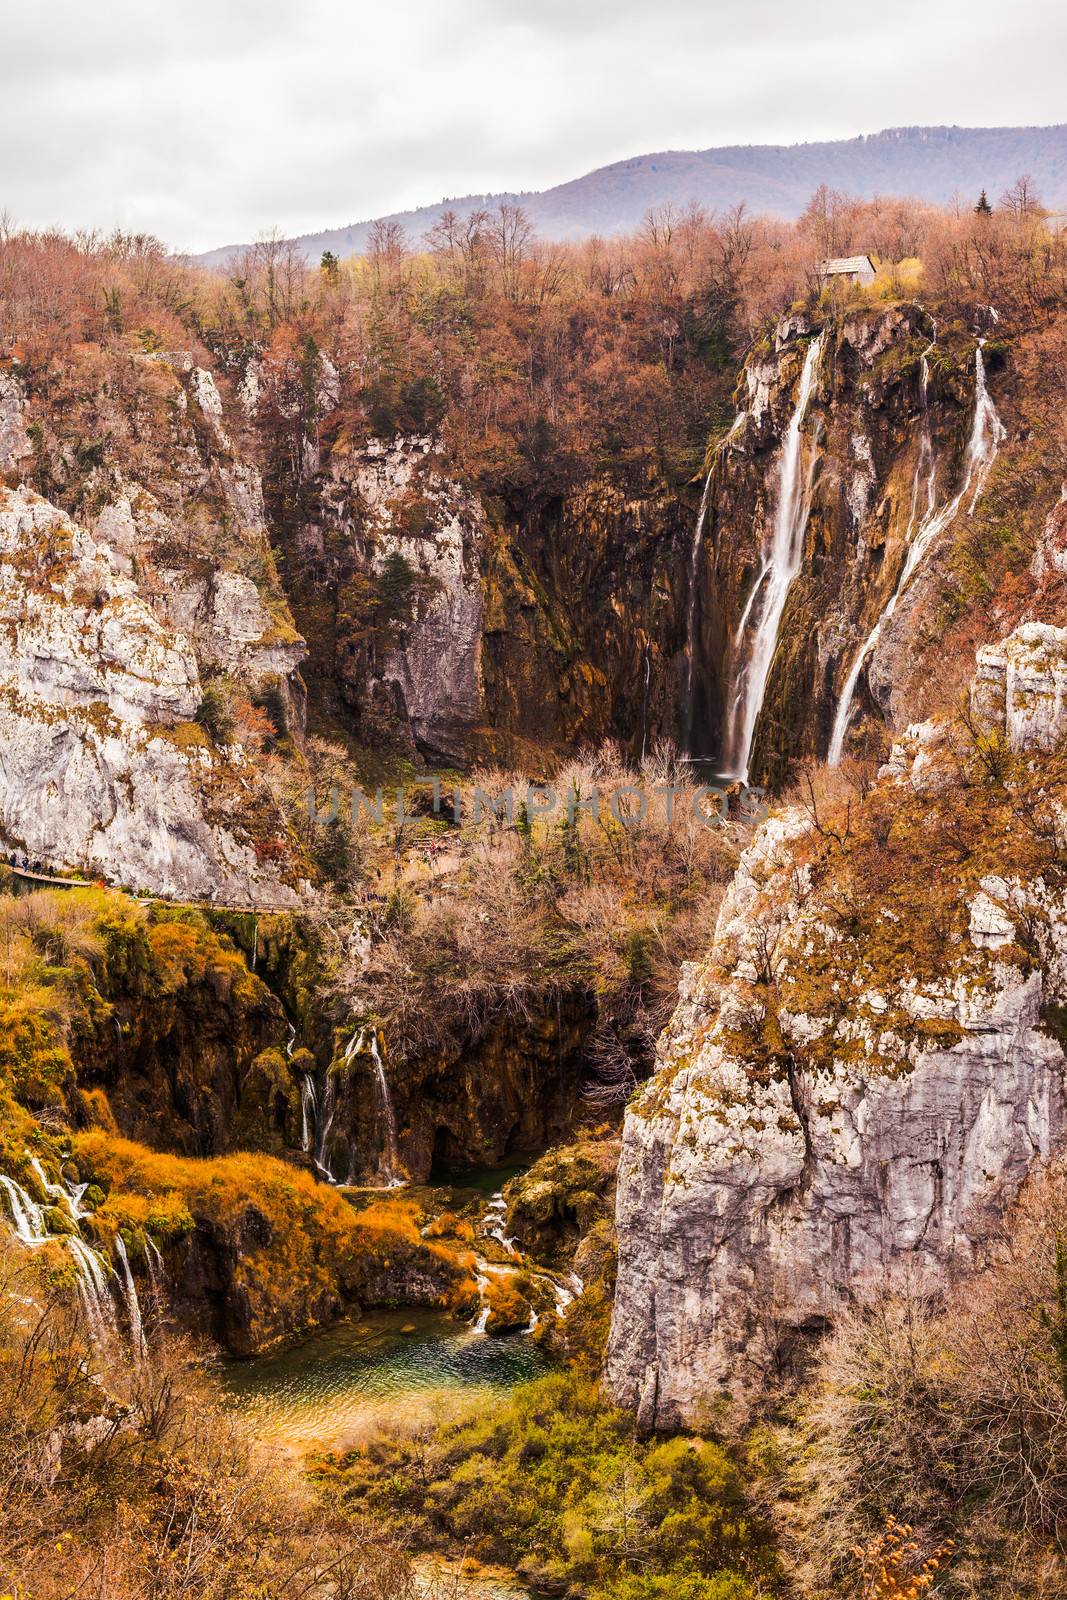 Biggest waterfall in Plitvice Lakes National Park. The Plitvice Lakes National Park is the largest national park in Croatia and is a UNESCO World Heritage Site.